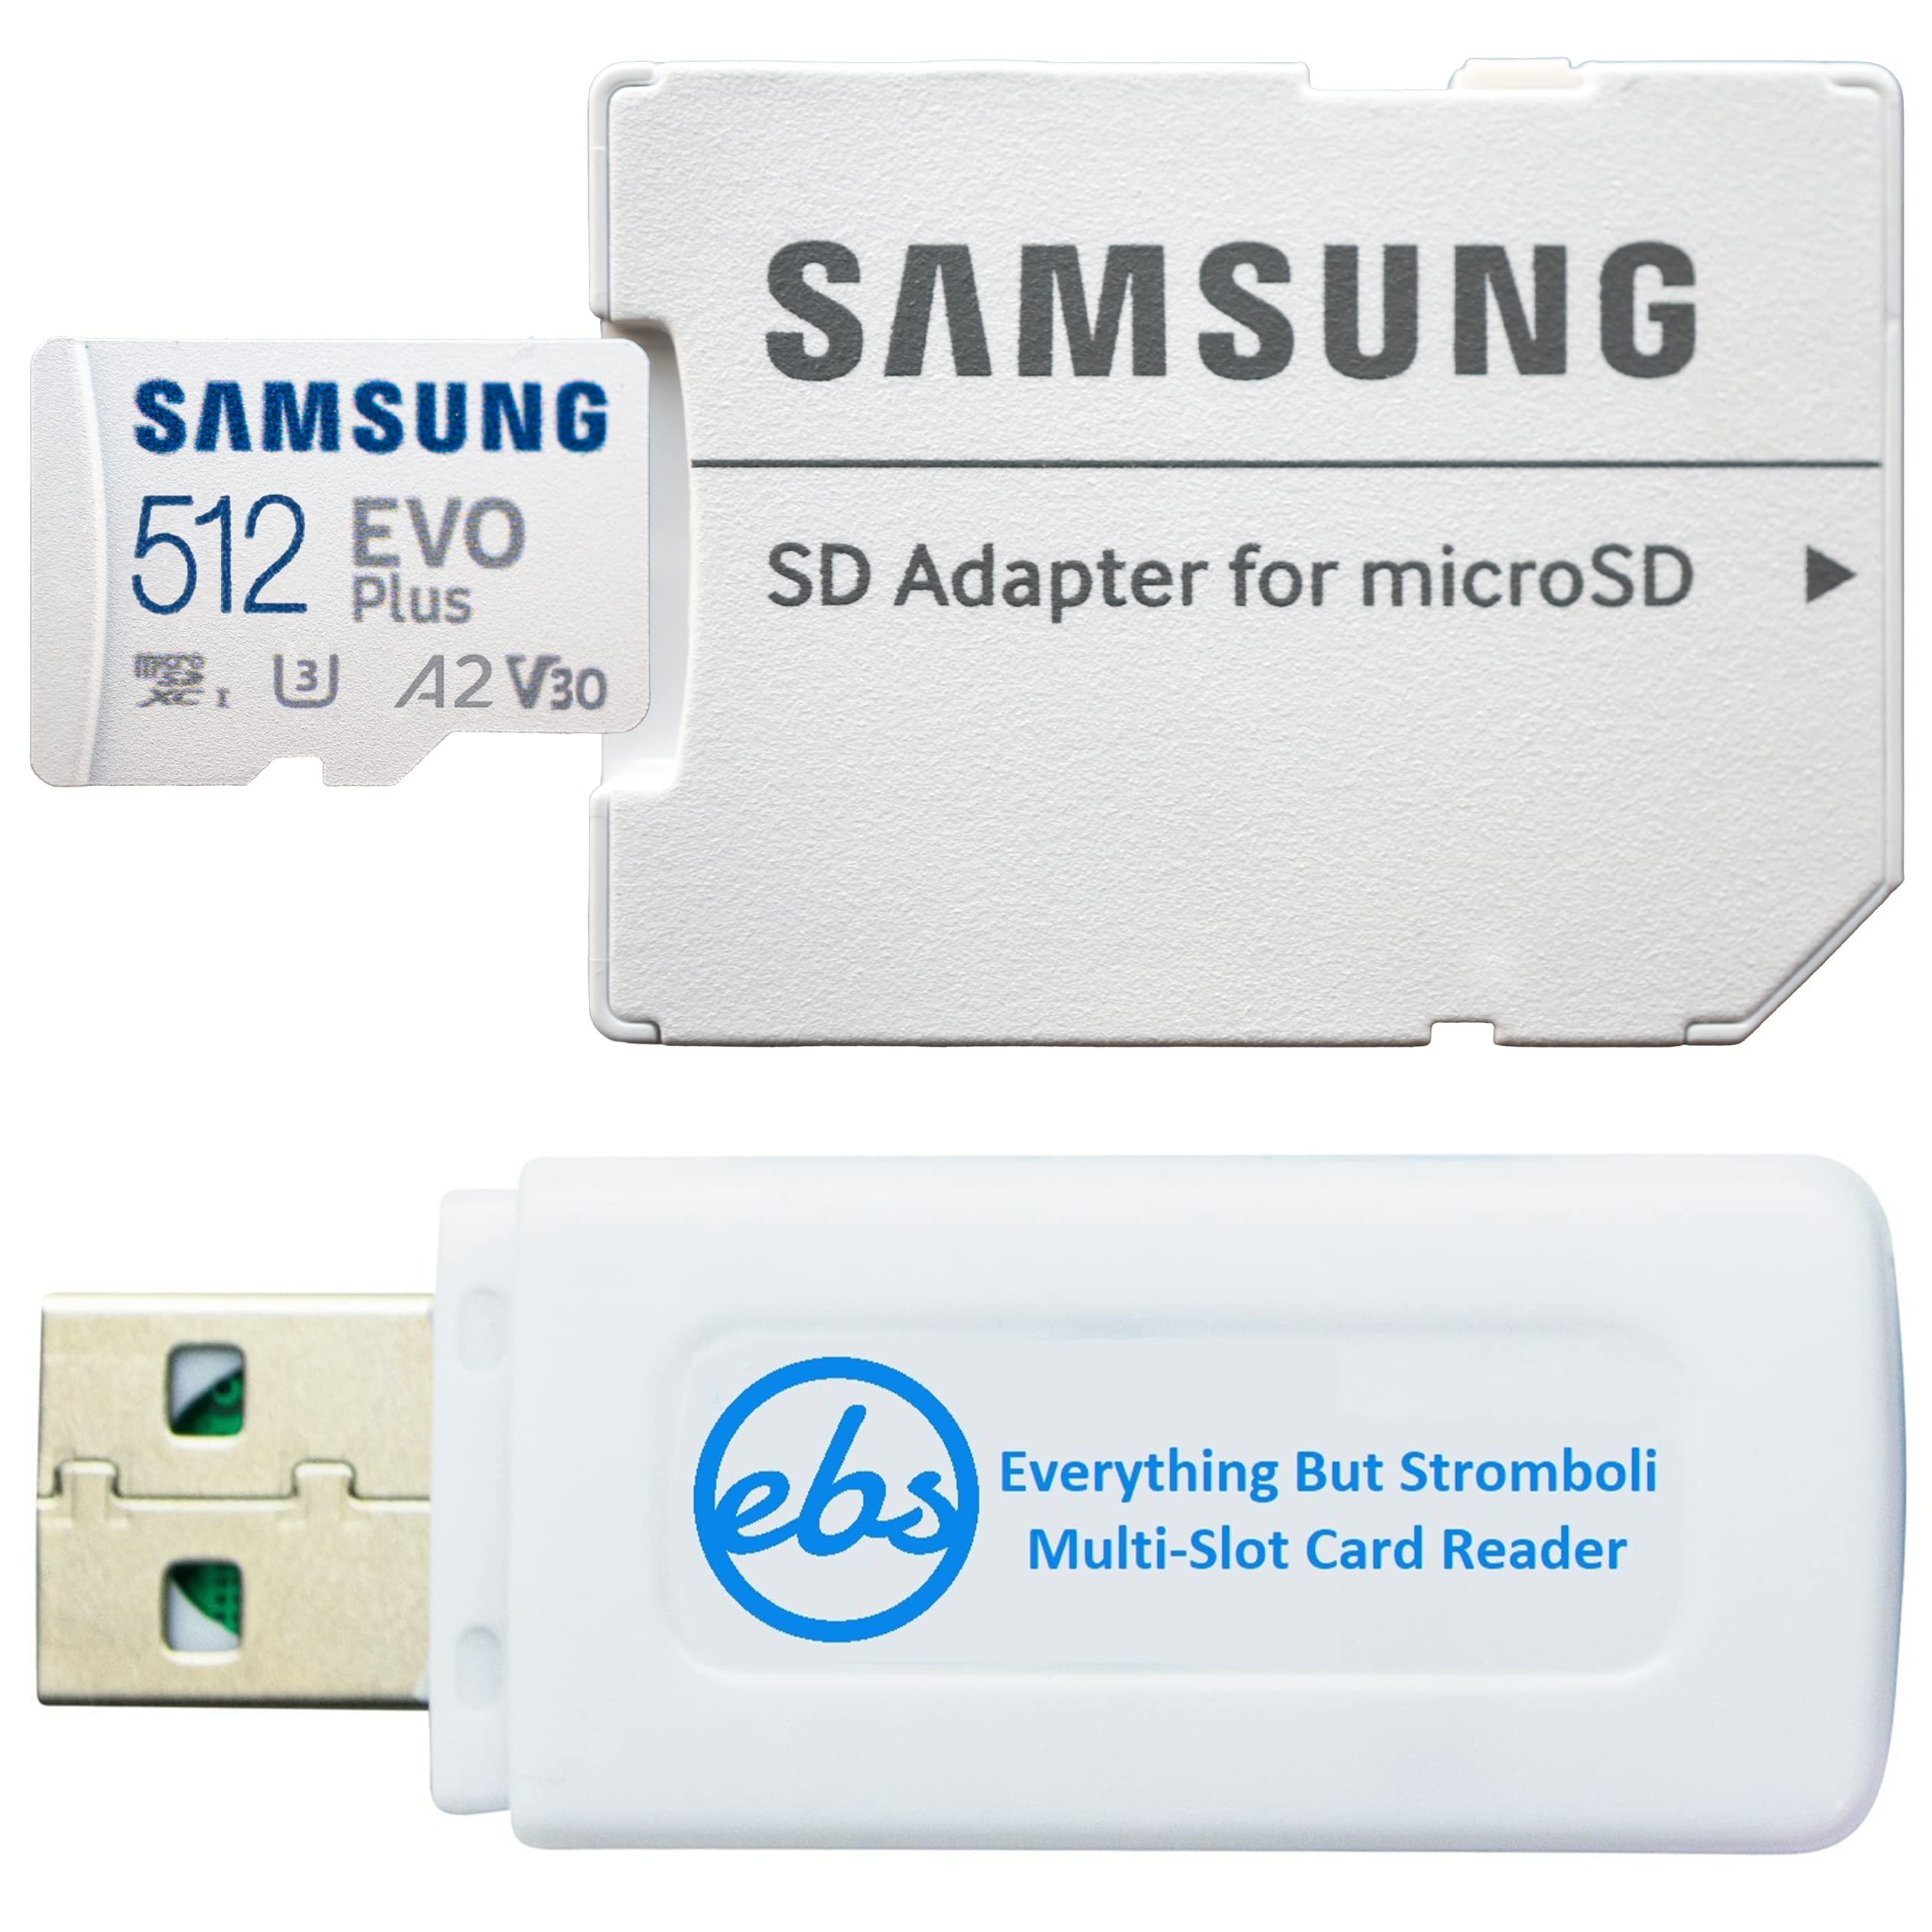 Samsung Evo Plus 512GB Micro SDXC Memory Card Class 10 A2 UHS-I U3 Works with Android Phones - Galaxy A51 A50 A40 A30 MB-